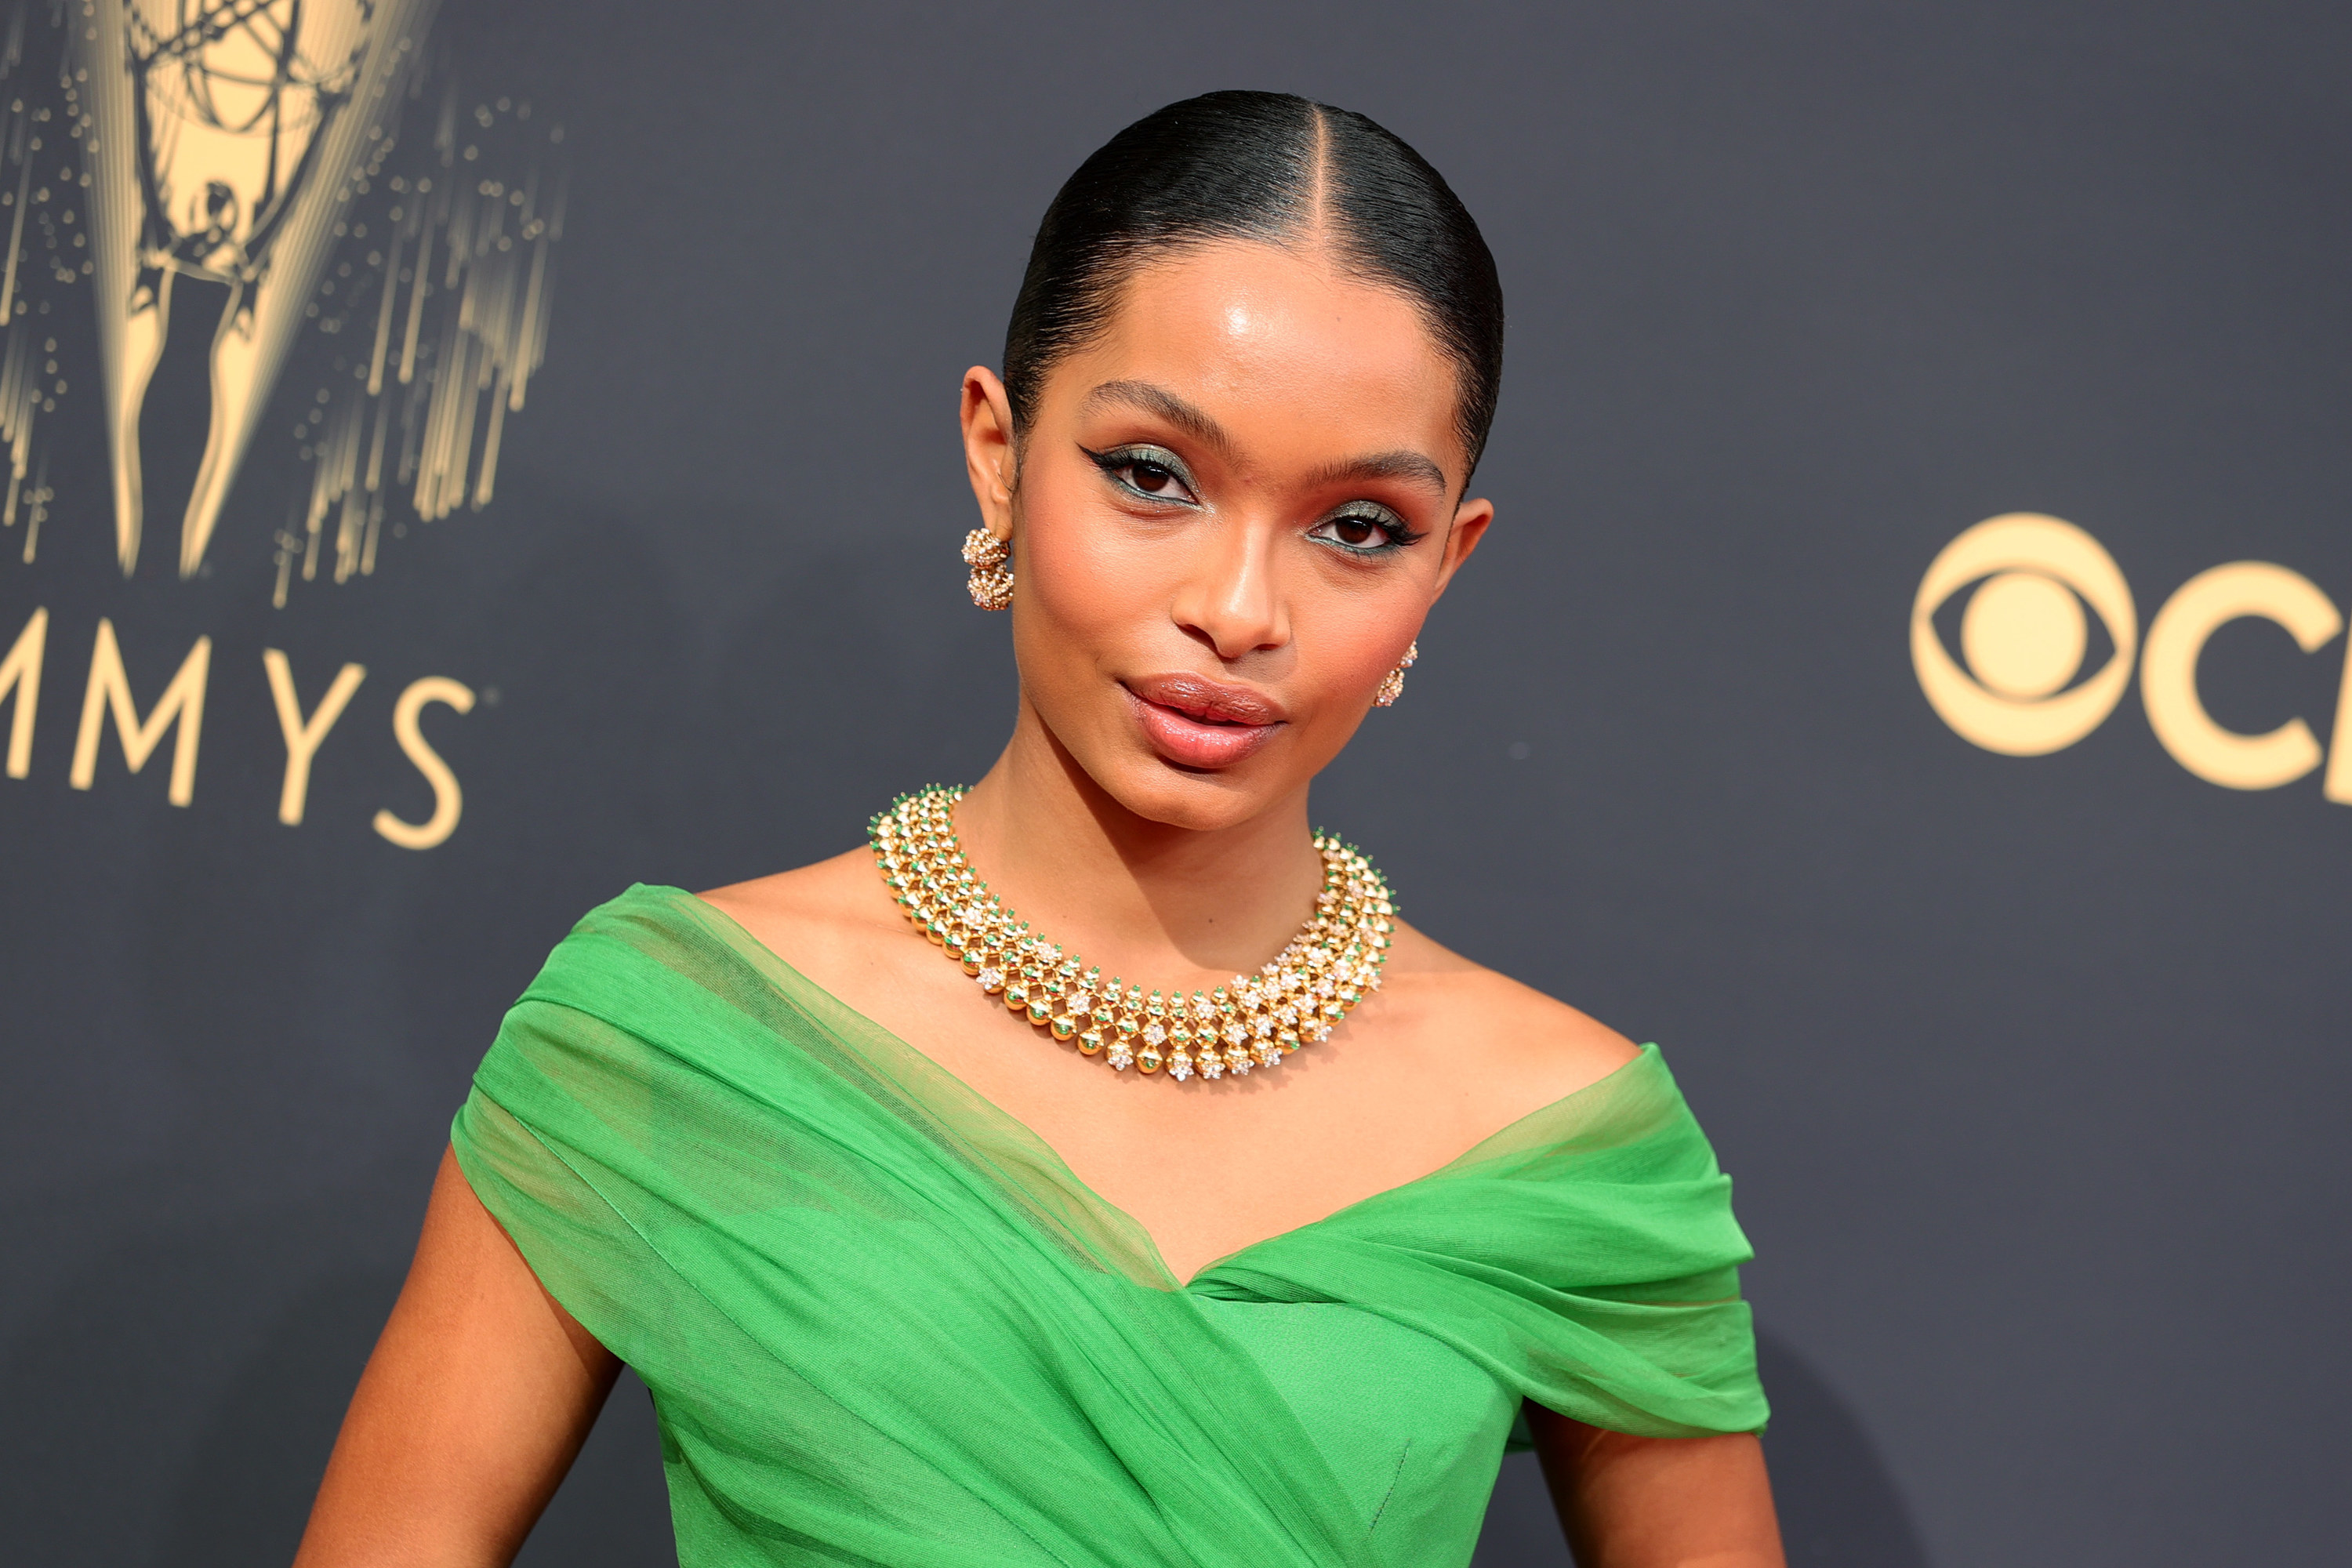 Yara Shahidi attends the 73rd Primetime Emmy Awards at L.A. LIVE on September 19, 2021